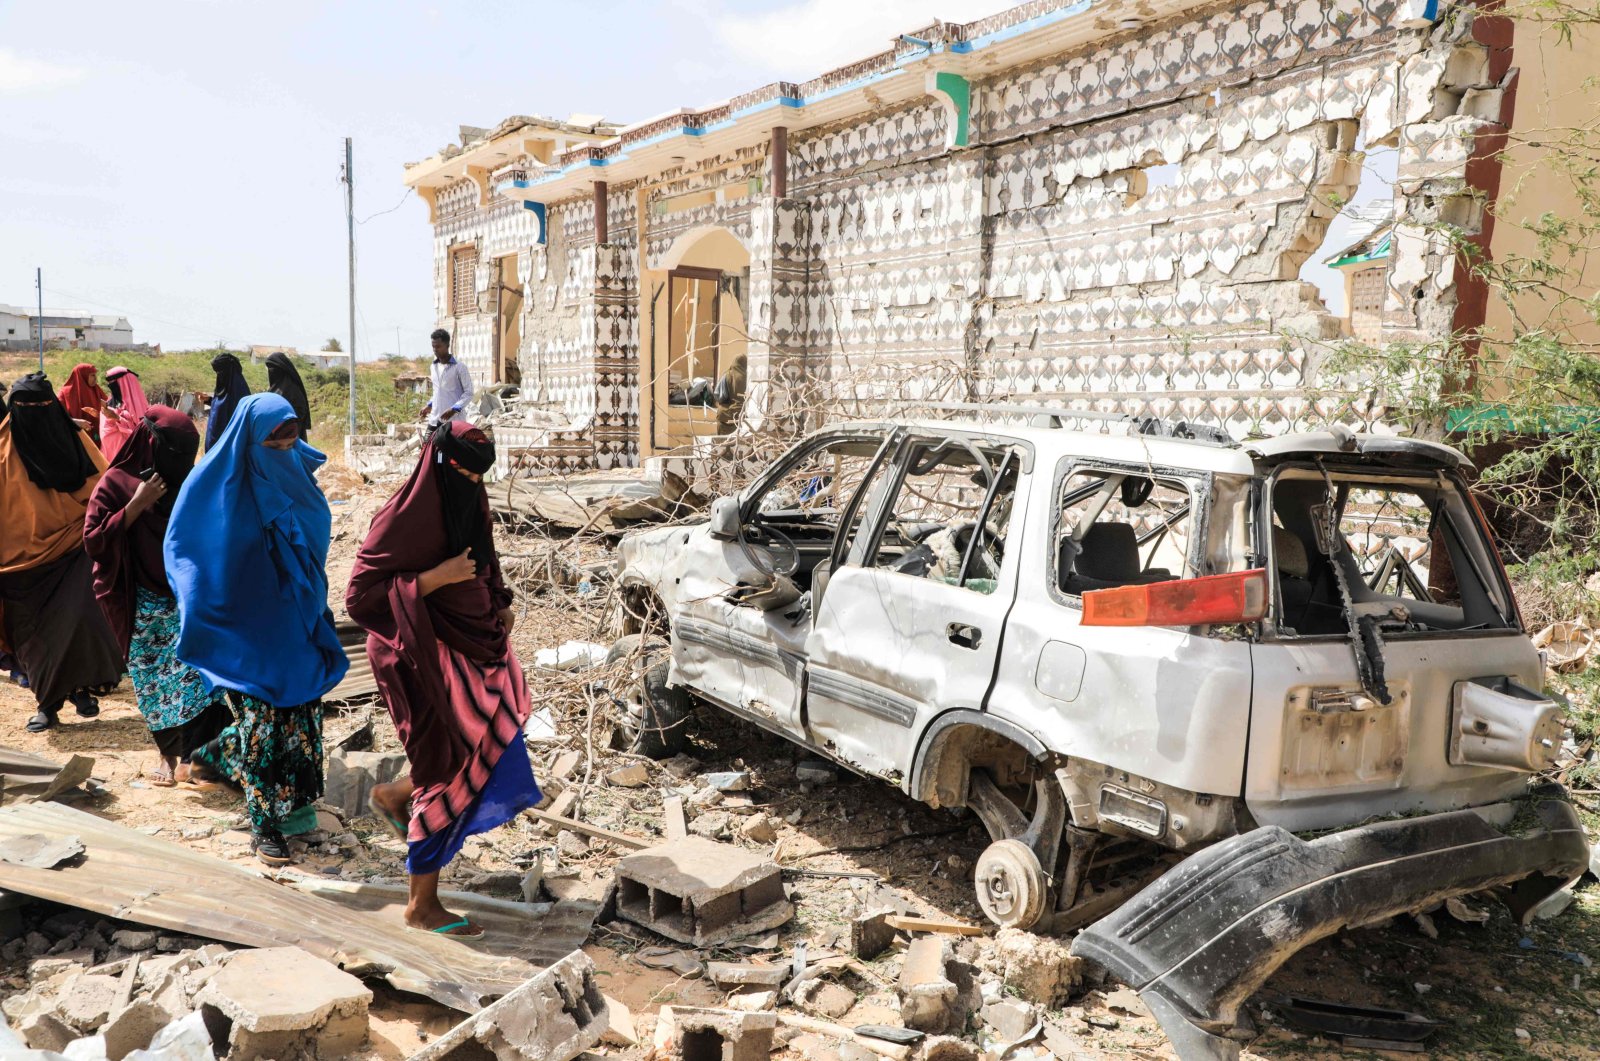 Women walk next to a destroyed house and the wreckage of a car following an explosion provoked by al-Shabab militants&#039; during an attack on a police station on the outskirts of Mogadishu, Somalia, Feb. 16, 2022. (AFP Photo)